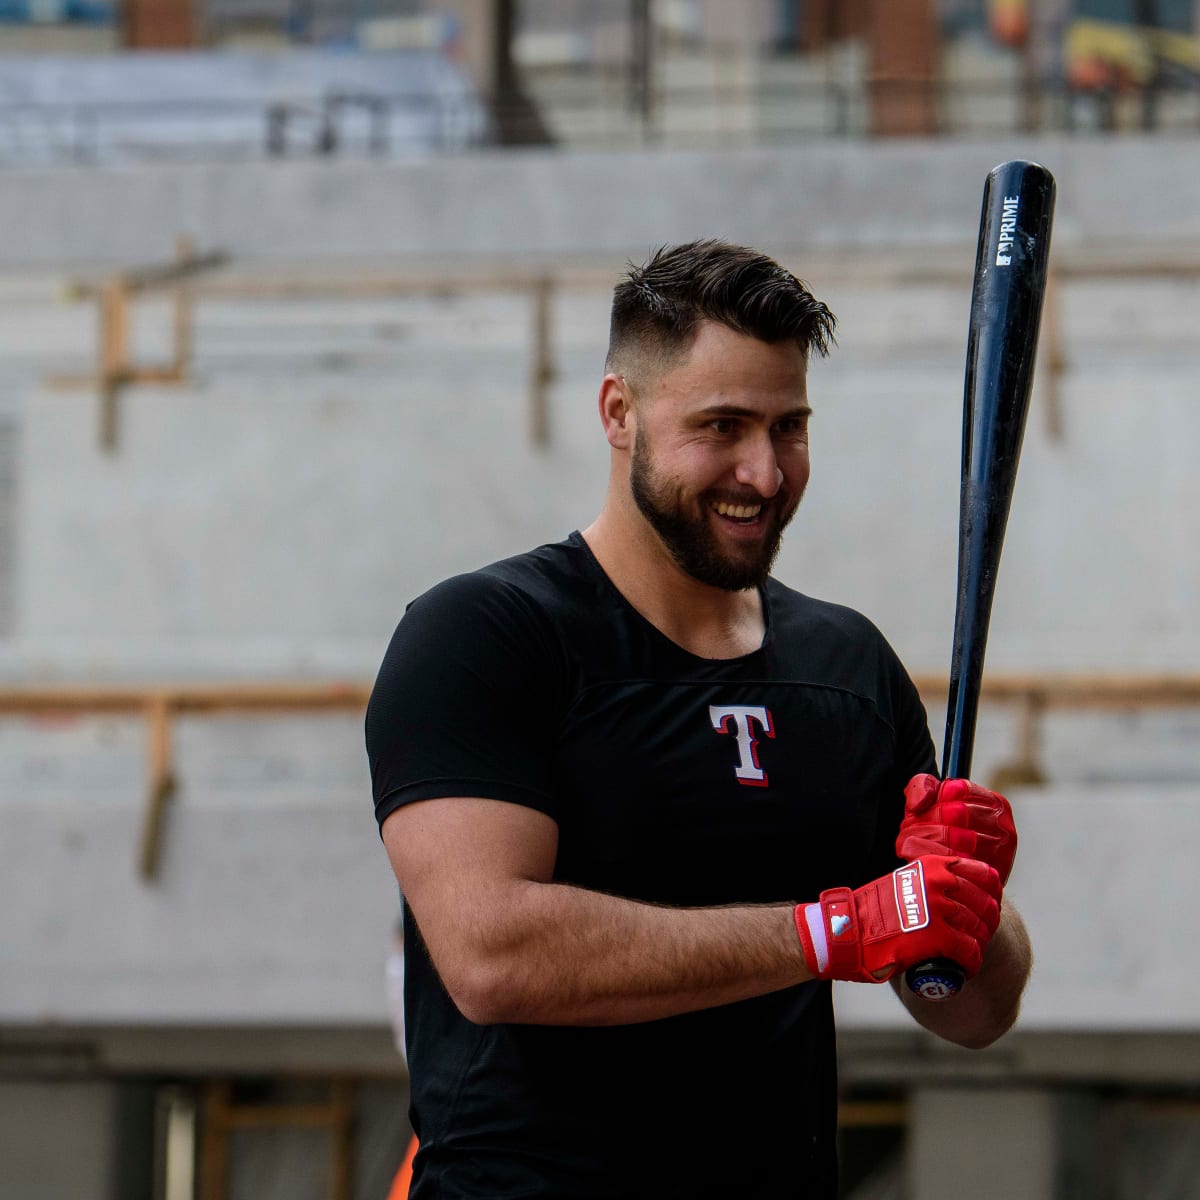 Joey Gallo made most of 2019 despite injuries